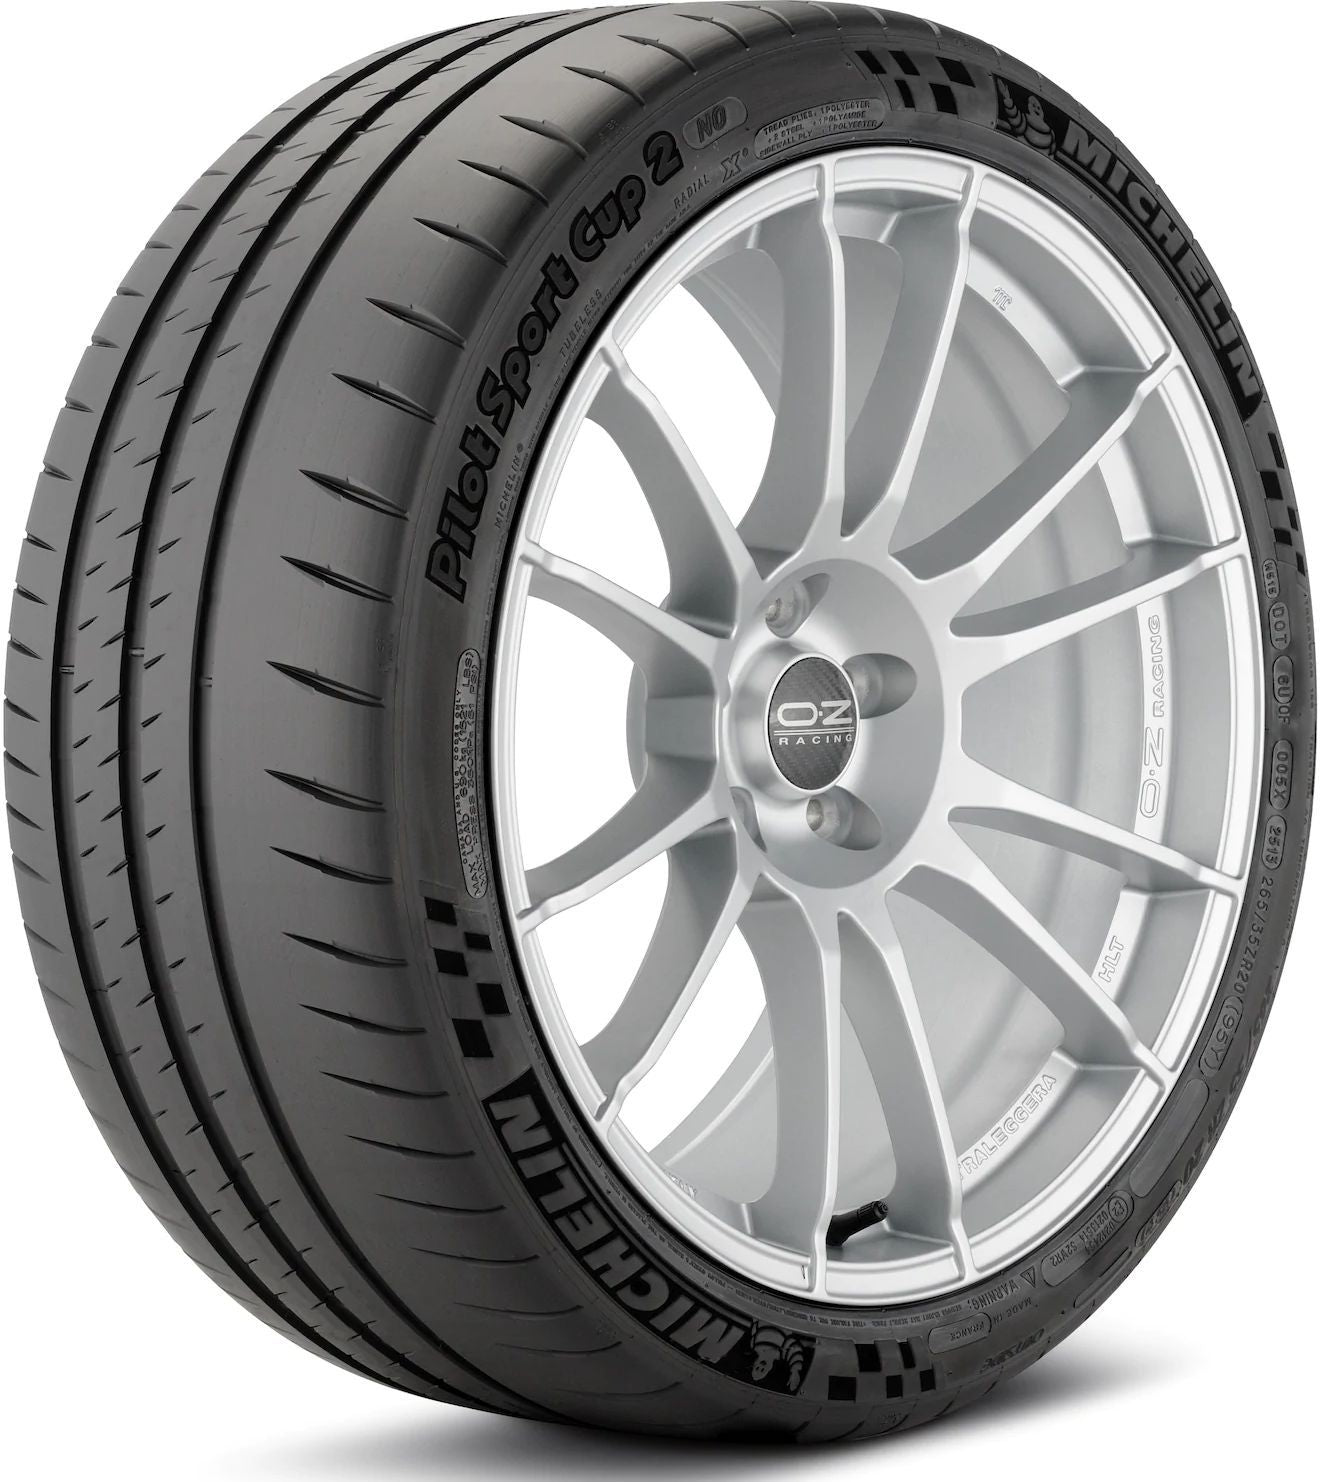 Michelin - Pilot Sport Cup 2 - 315/30R20 XL 104(Y) BSW - Summer Tires -  PMCtire - 89959